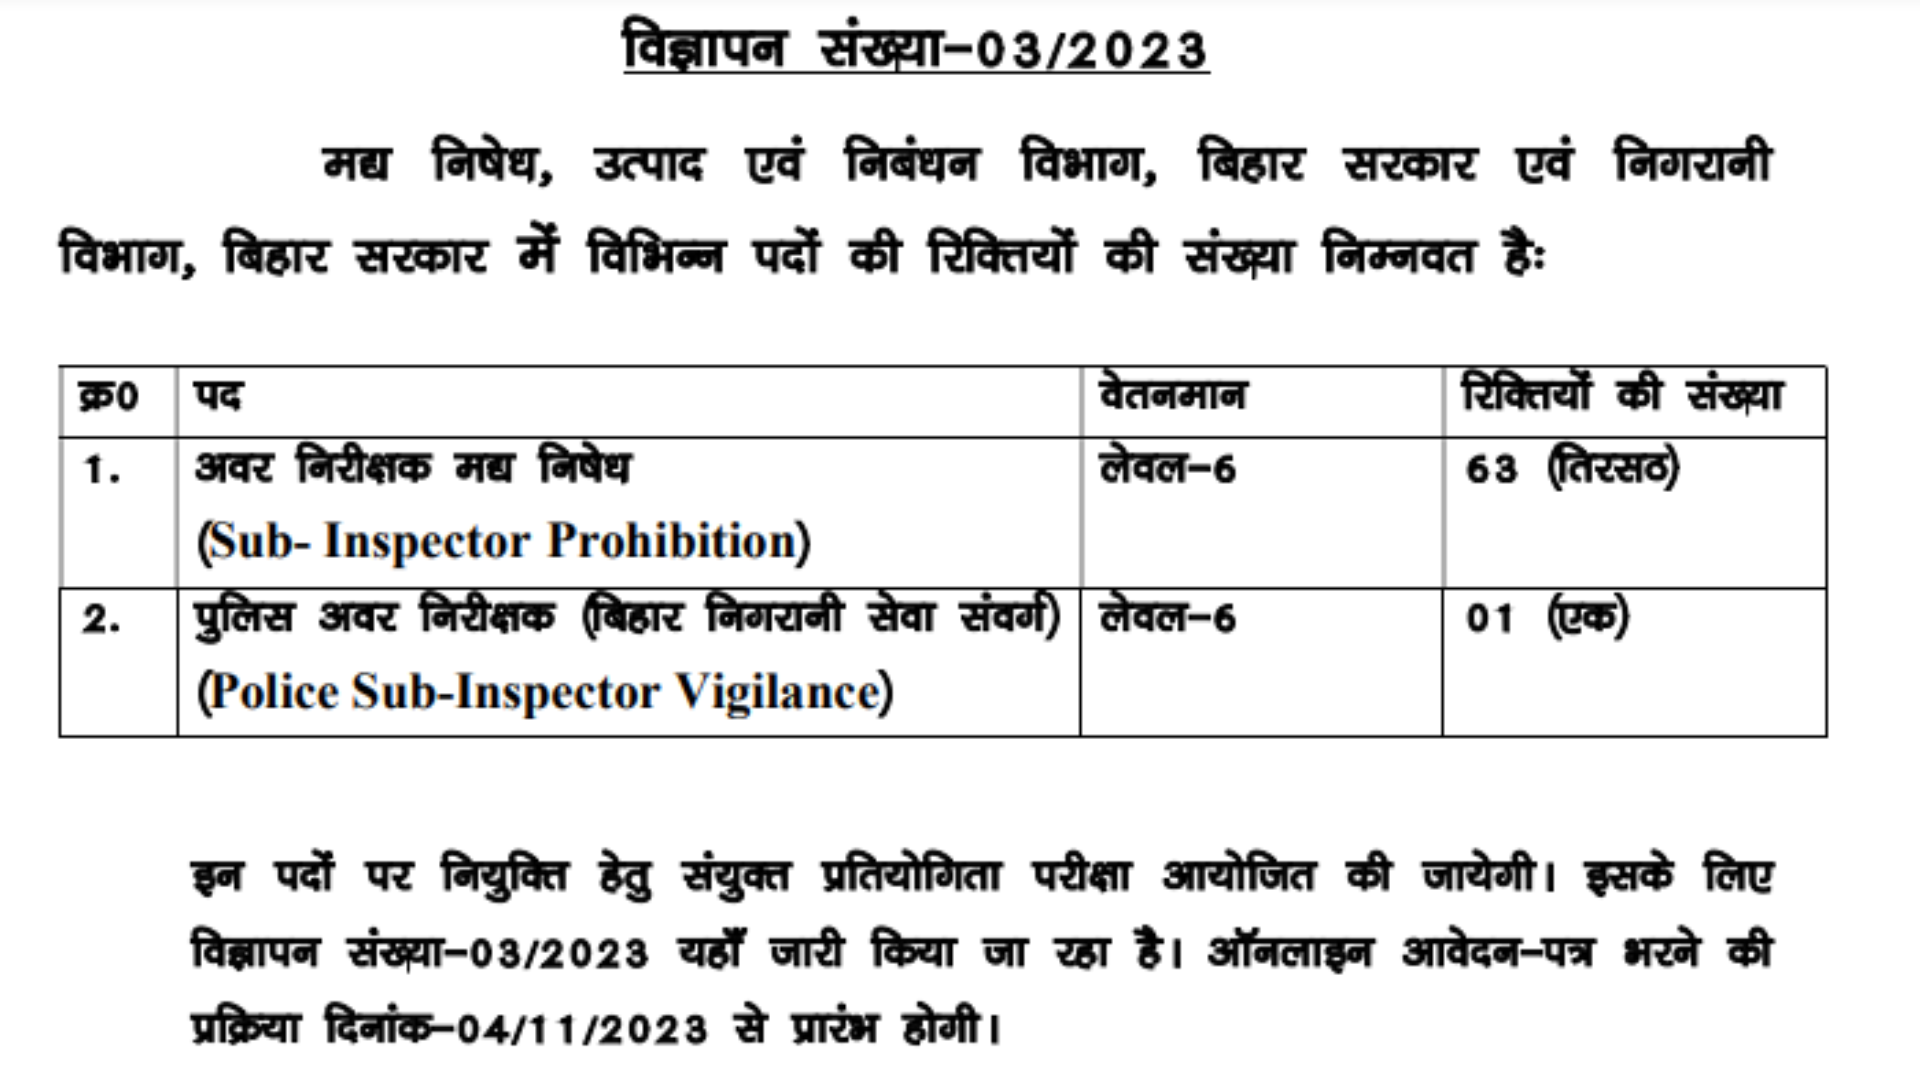 Bihar Police Prohibition Sub-Inspector (SI) Vacancy 2023 Notification and Online Form